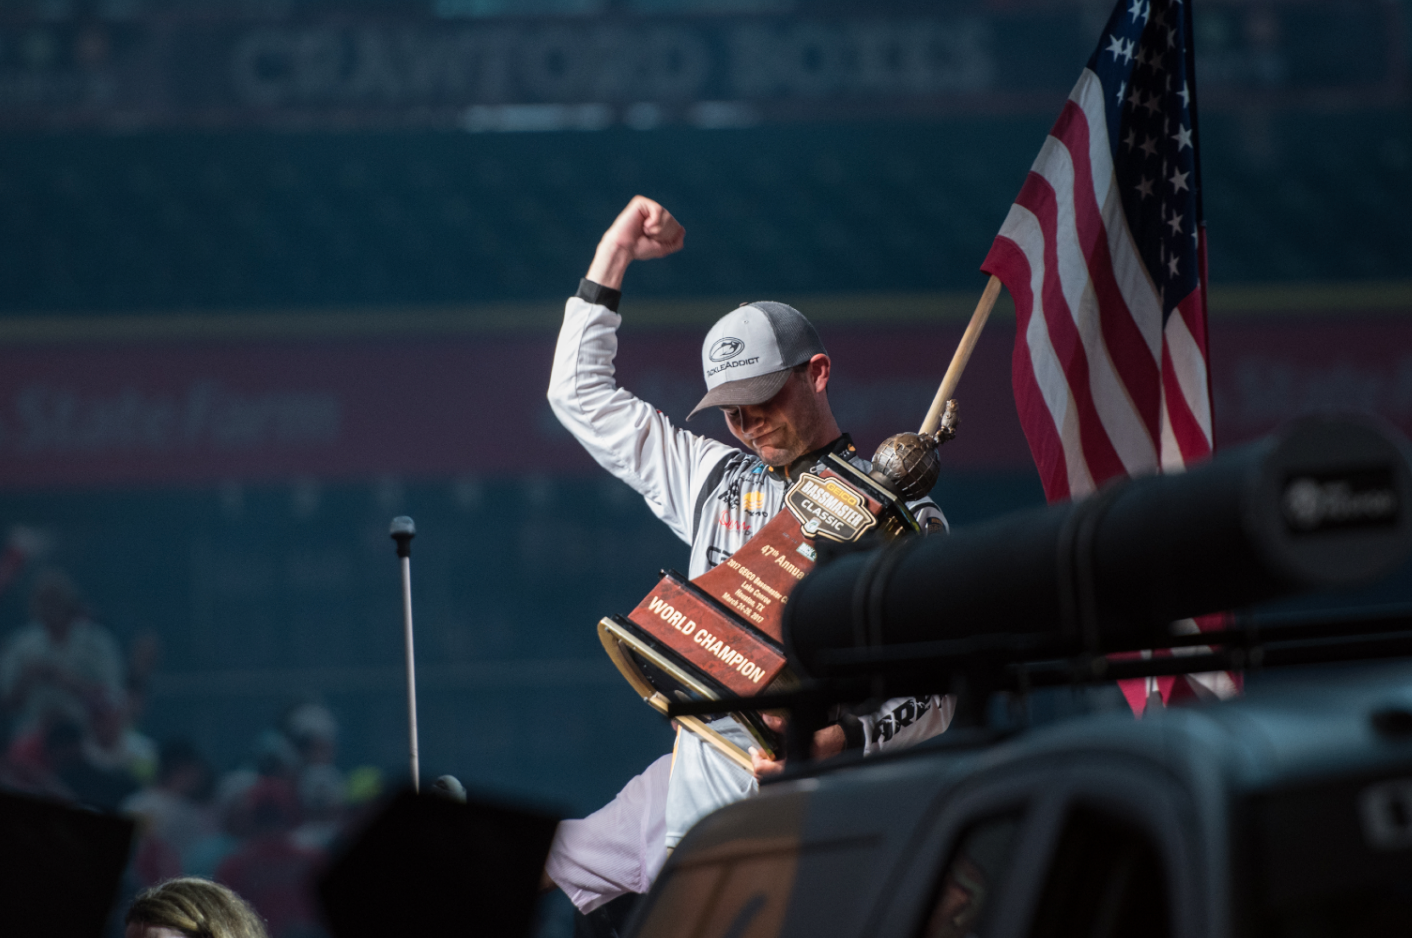 <h4>What means more, a Classic victory or winning Toyota Angler of the Year?</h4>
Thereâs no bigger stage in fishing than the Bassmaster Classic. Just qualifying means you had to do great in the Opens or rank among the top 40 or so on the Elite Series.<BR>
Two-time Classic Champ Jordan Lee knows that Classic victories are career-defining moments. And while they might mean the most in terms of public perception, when it comes to skill, Angler of the Year is the toughest trophy to win in bass fishing.<BR>
Says Jordan, âThe Classic is a three-day event. Itâs a mental game, for sure. But to win AOY, youâve got to be the best of the best for more than just a weekend, youâve got to be consistent for an entire season. Thatâs about 12 tournaments and over 40 days of competition.â
